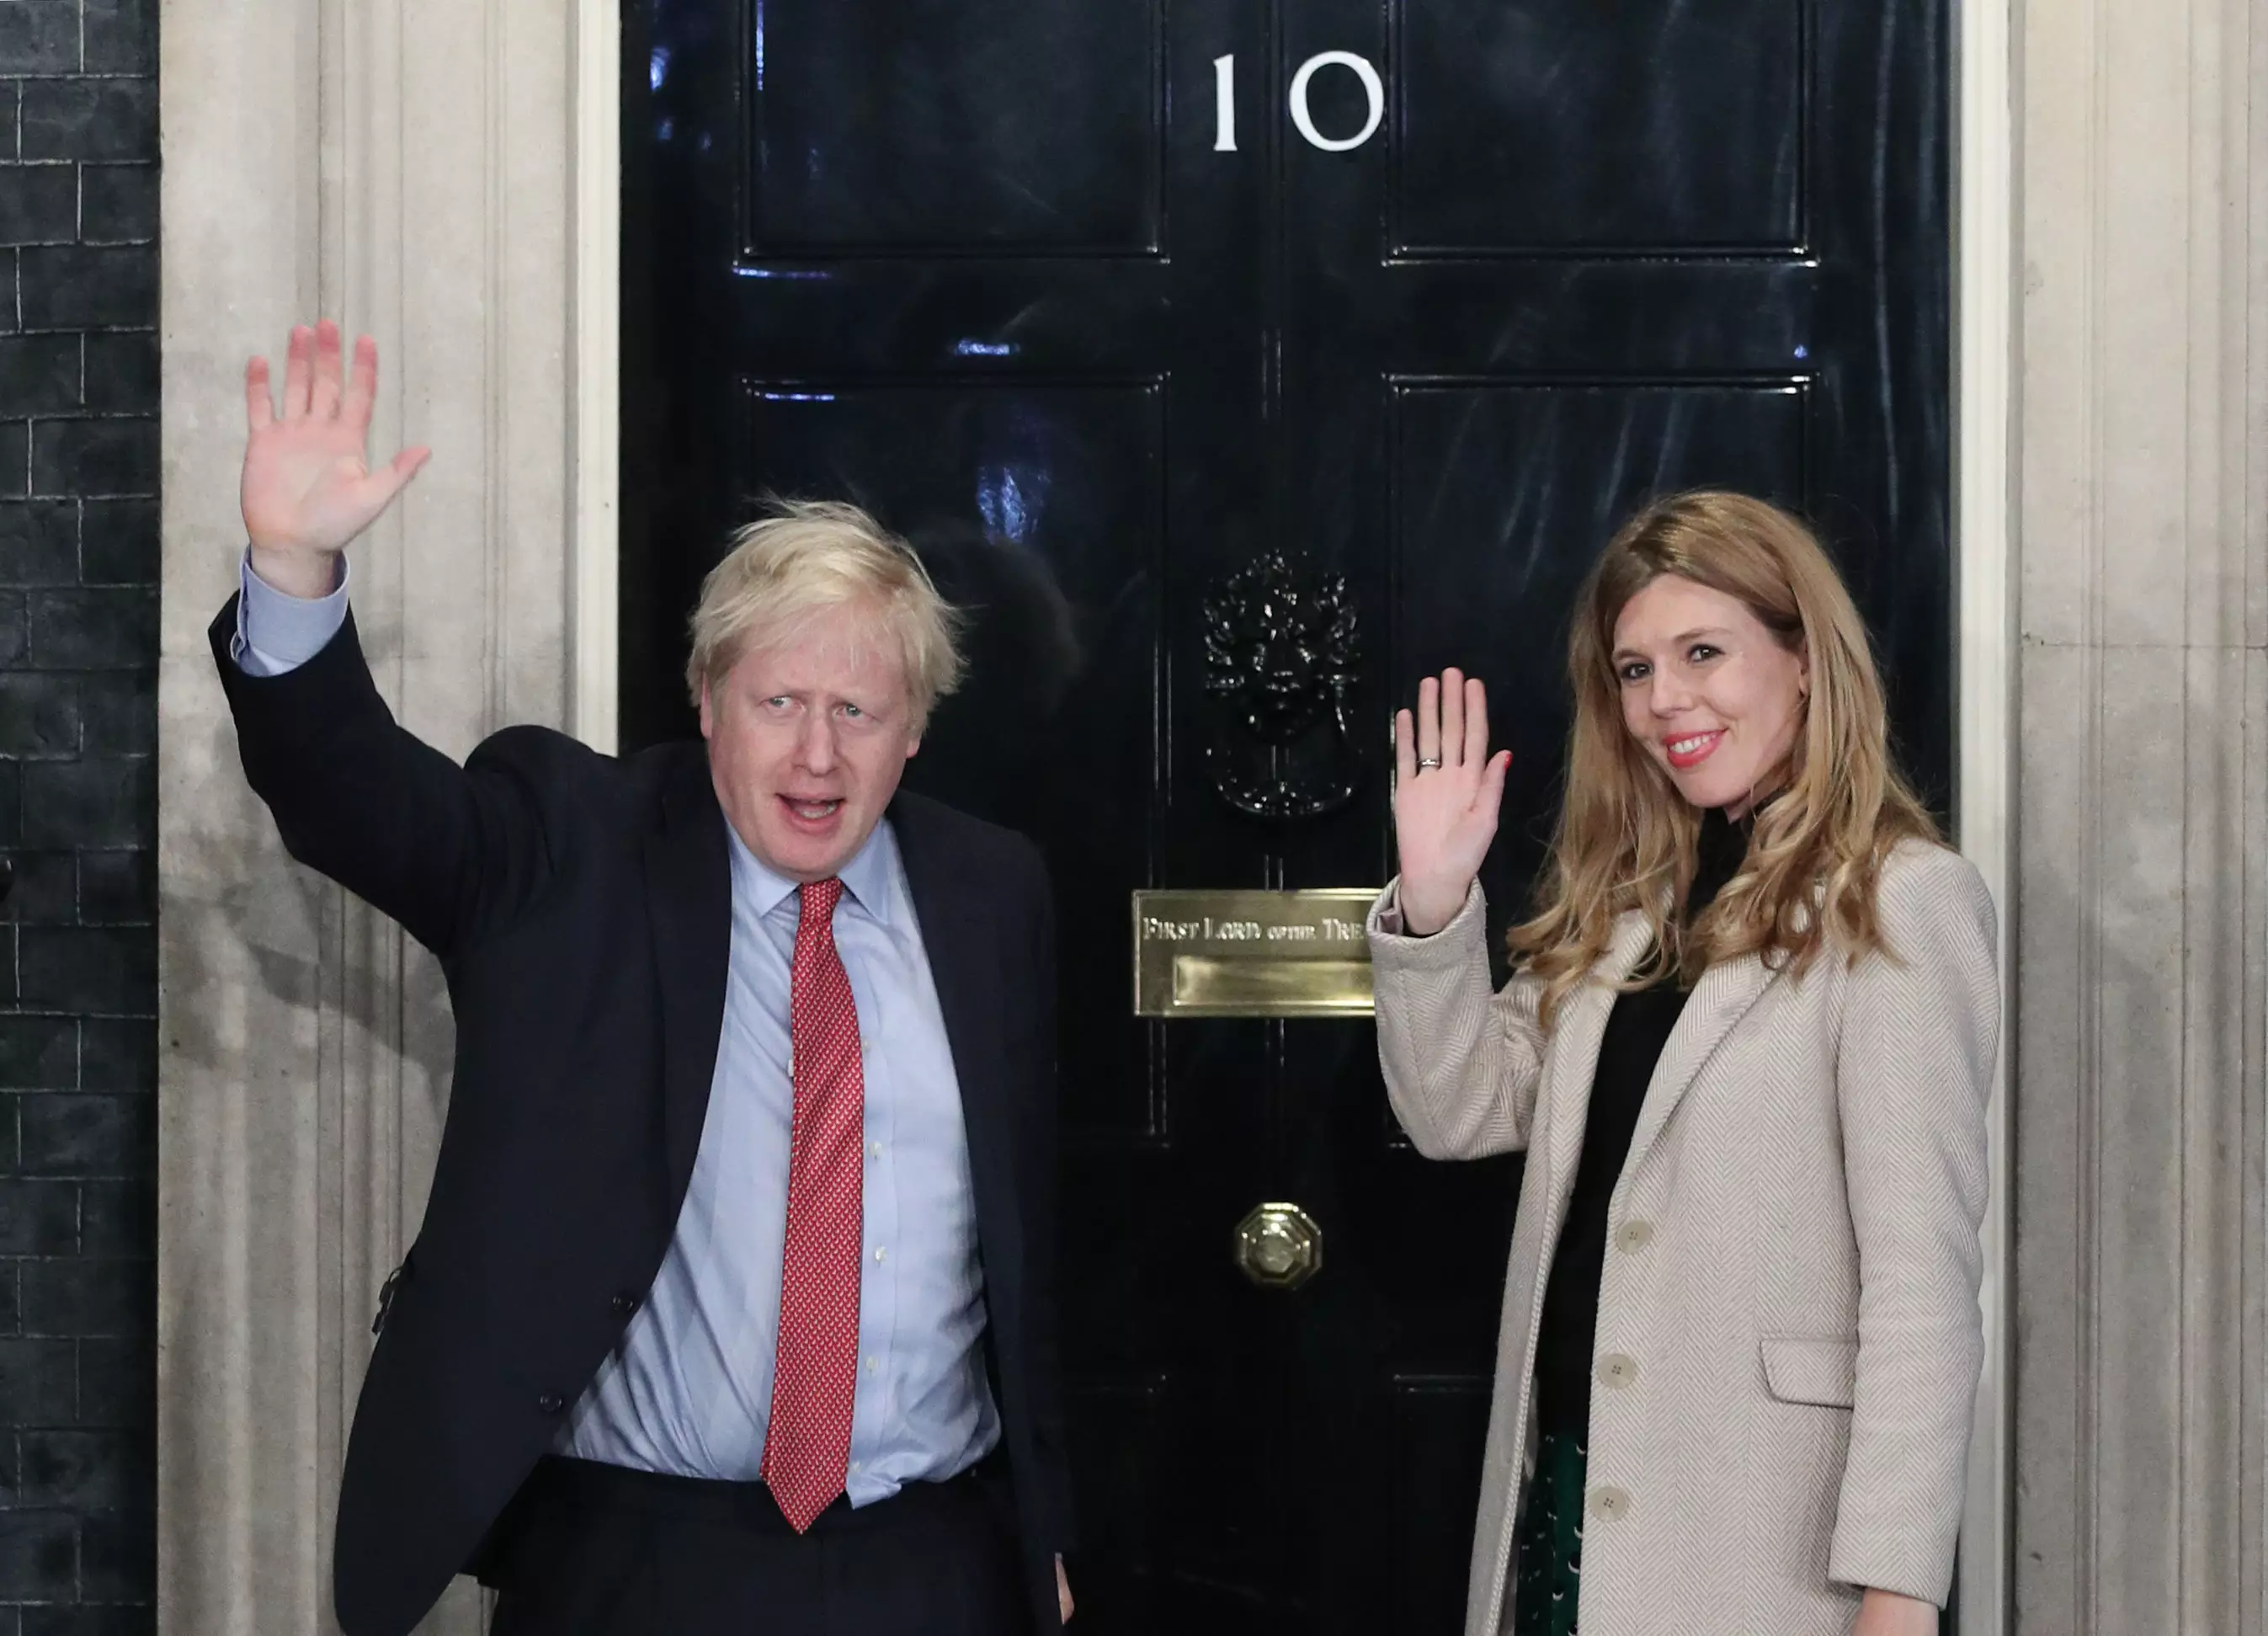 Boris and Carrie, pictured at Downing Street, have welcomed their first child (